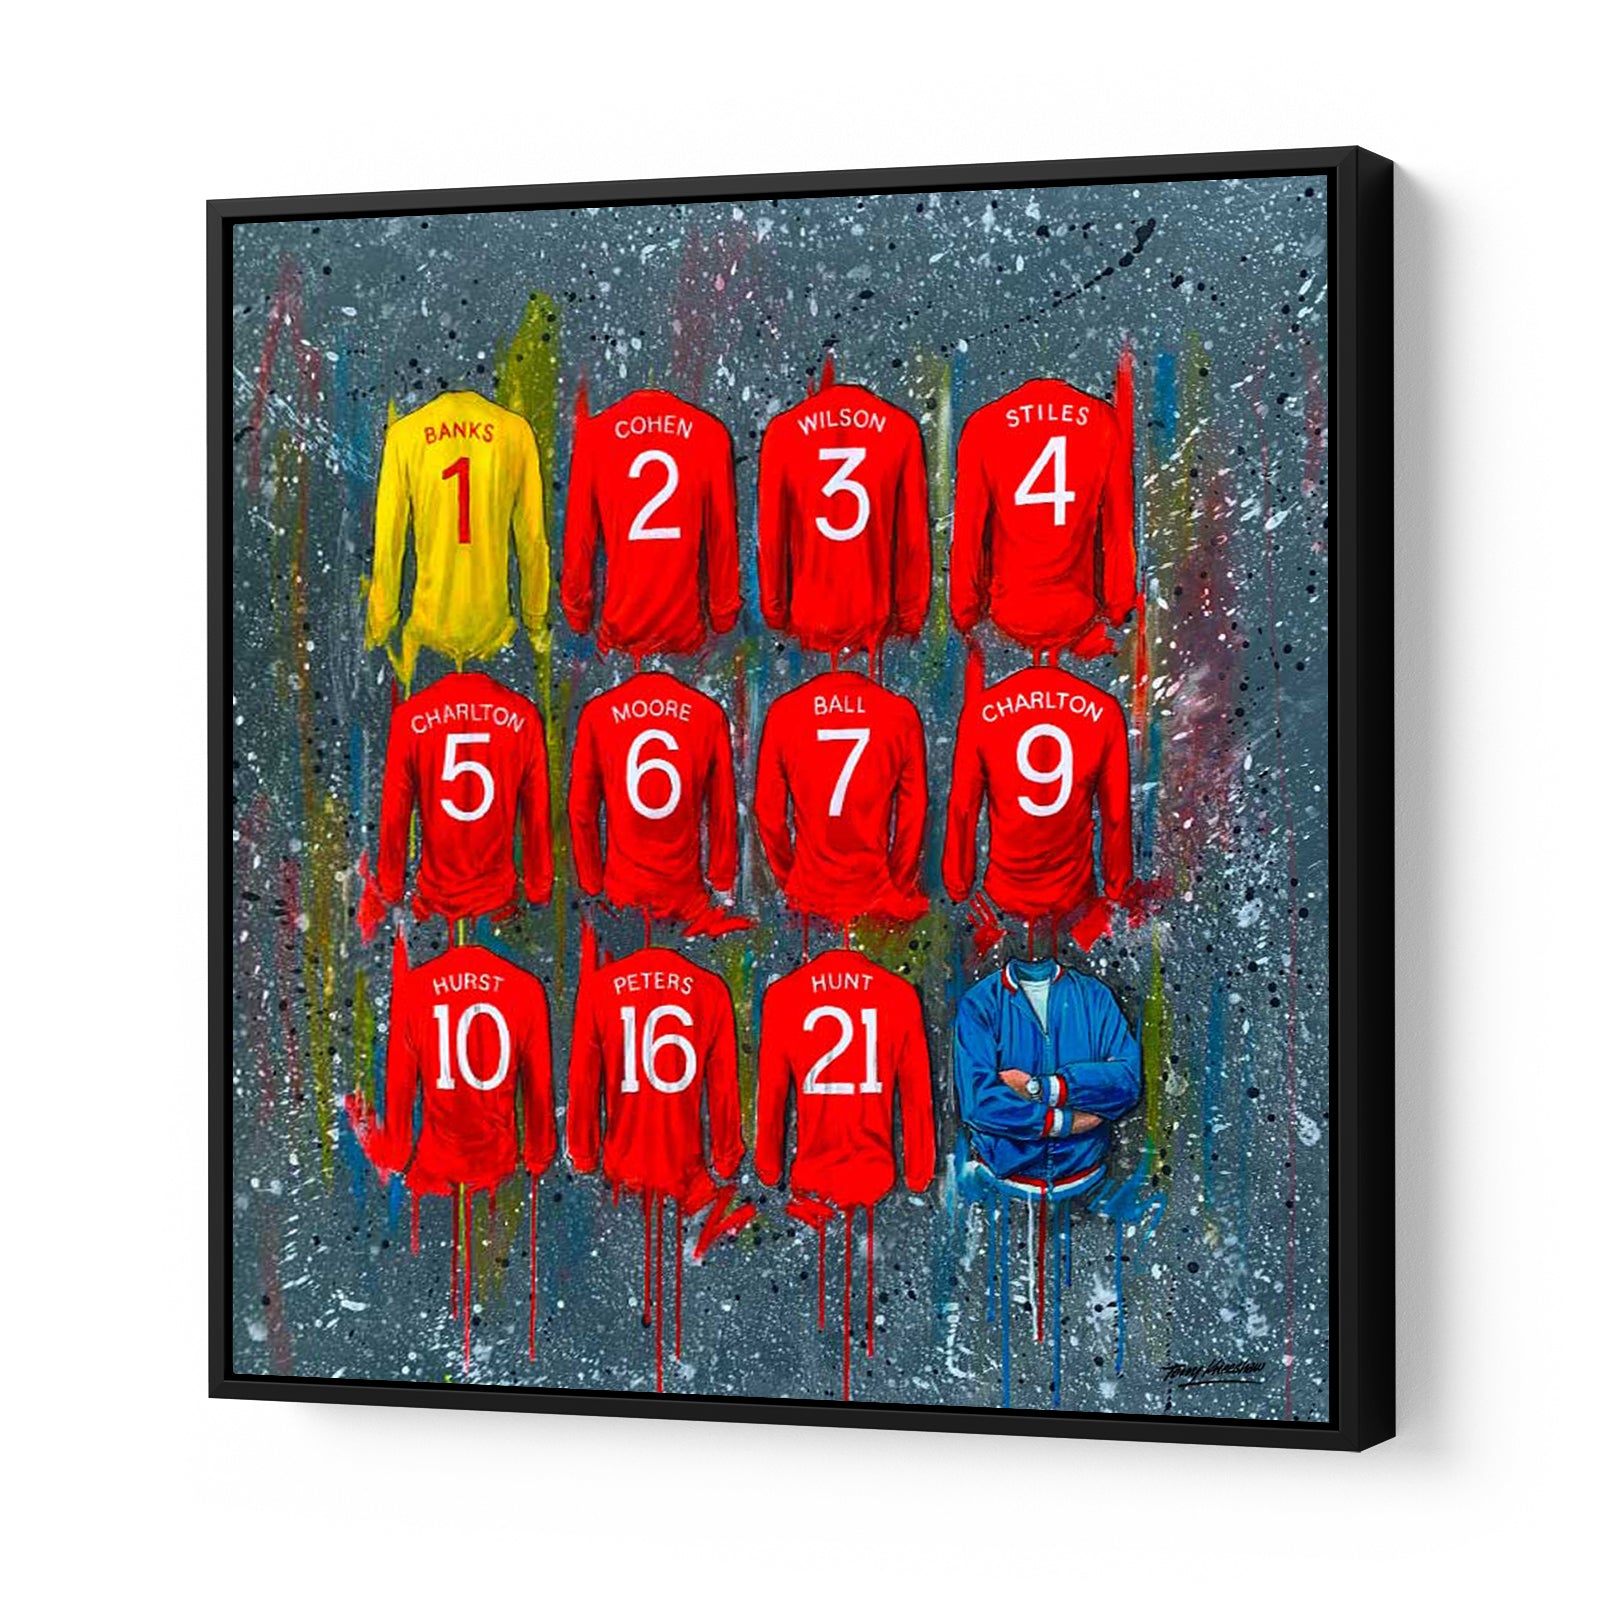 Terry Kneeshaw offers various sizes of England 1966 canvases, perfect for any football fan. Choose between 20x20, 30x30, or 40x40 framed or unframed with a black floating frame. These canvases commemorate the iconic English team that won the 1966 FIFA World Cup, featuring the likes of Bobby Charlton, Geoff Hurst, and Bobby Moore. Each canvas is a unique piece of art that captures the spirit of one of England's greatest footballing achievements.